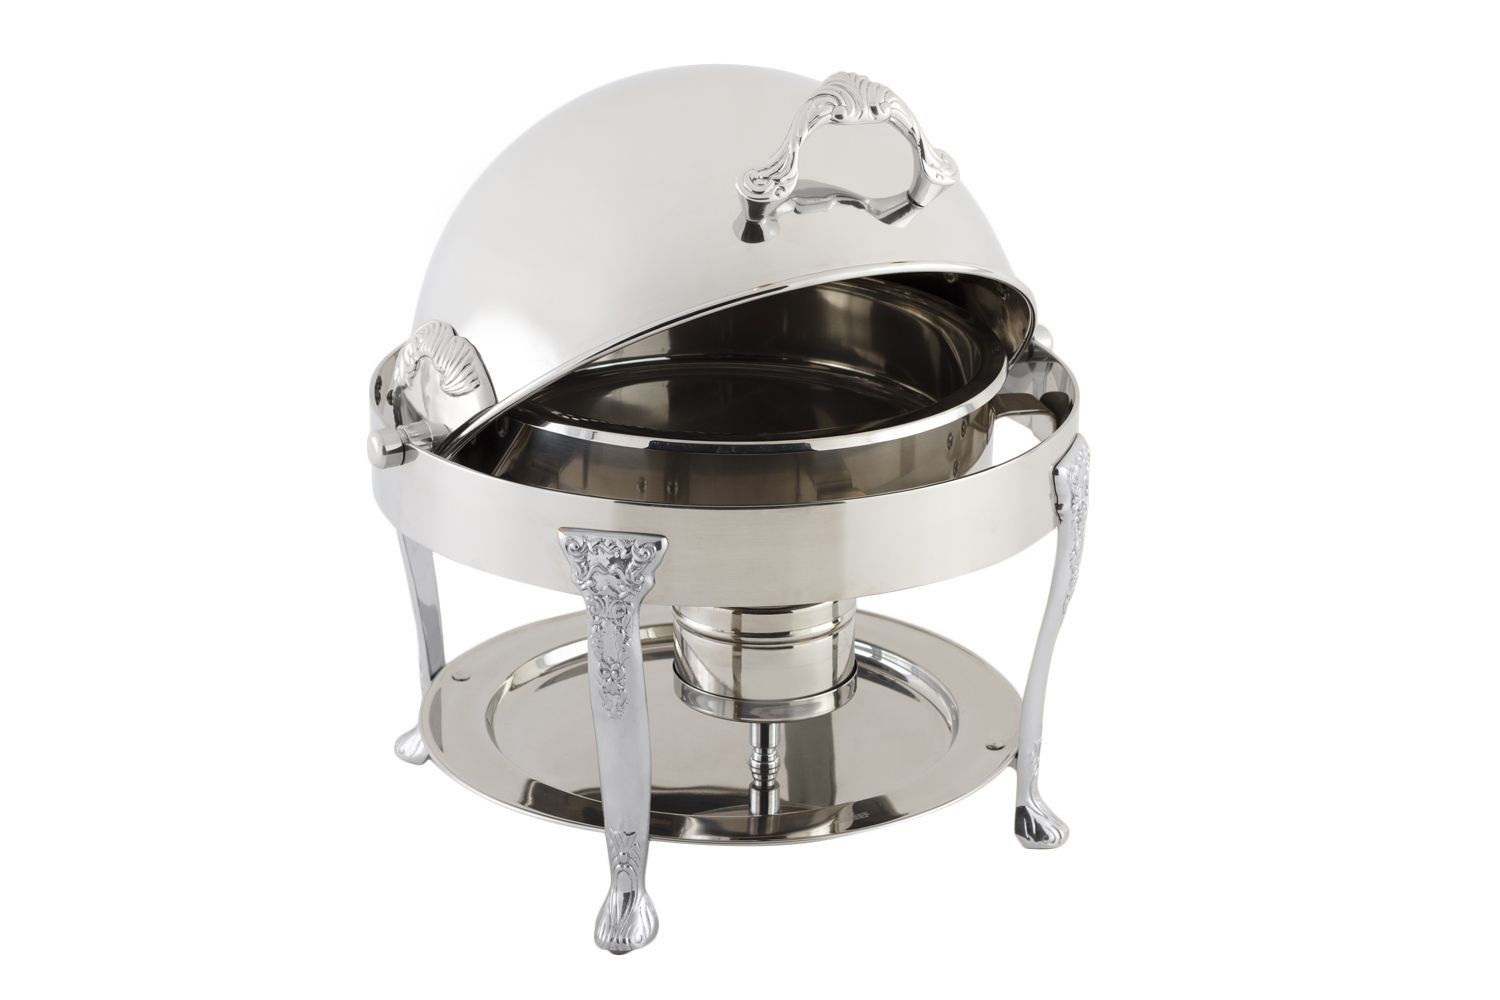 Bon Chef 17014CH Petite Dripless Round Chafer with Chrome Aceents and Renaissance Legs, 3 Qt.